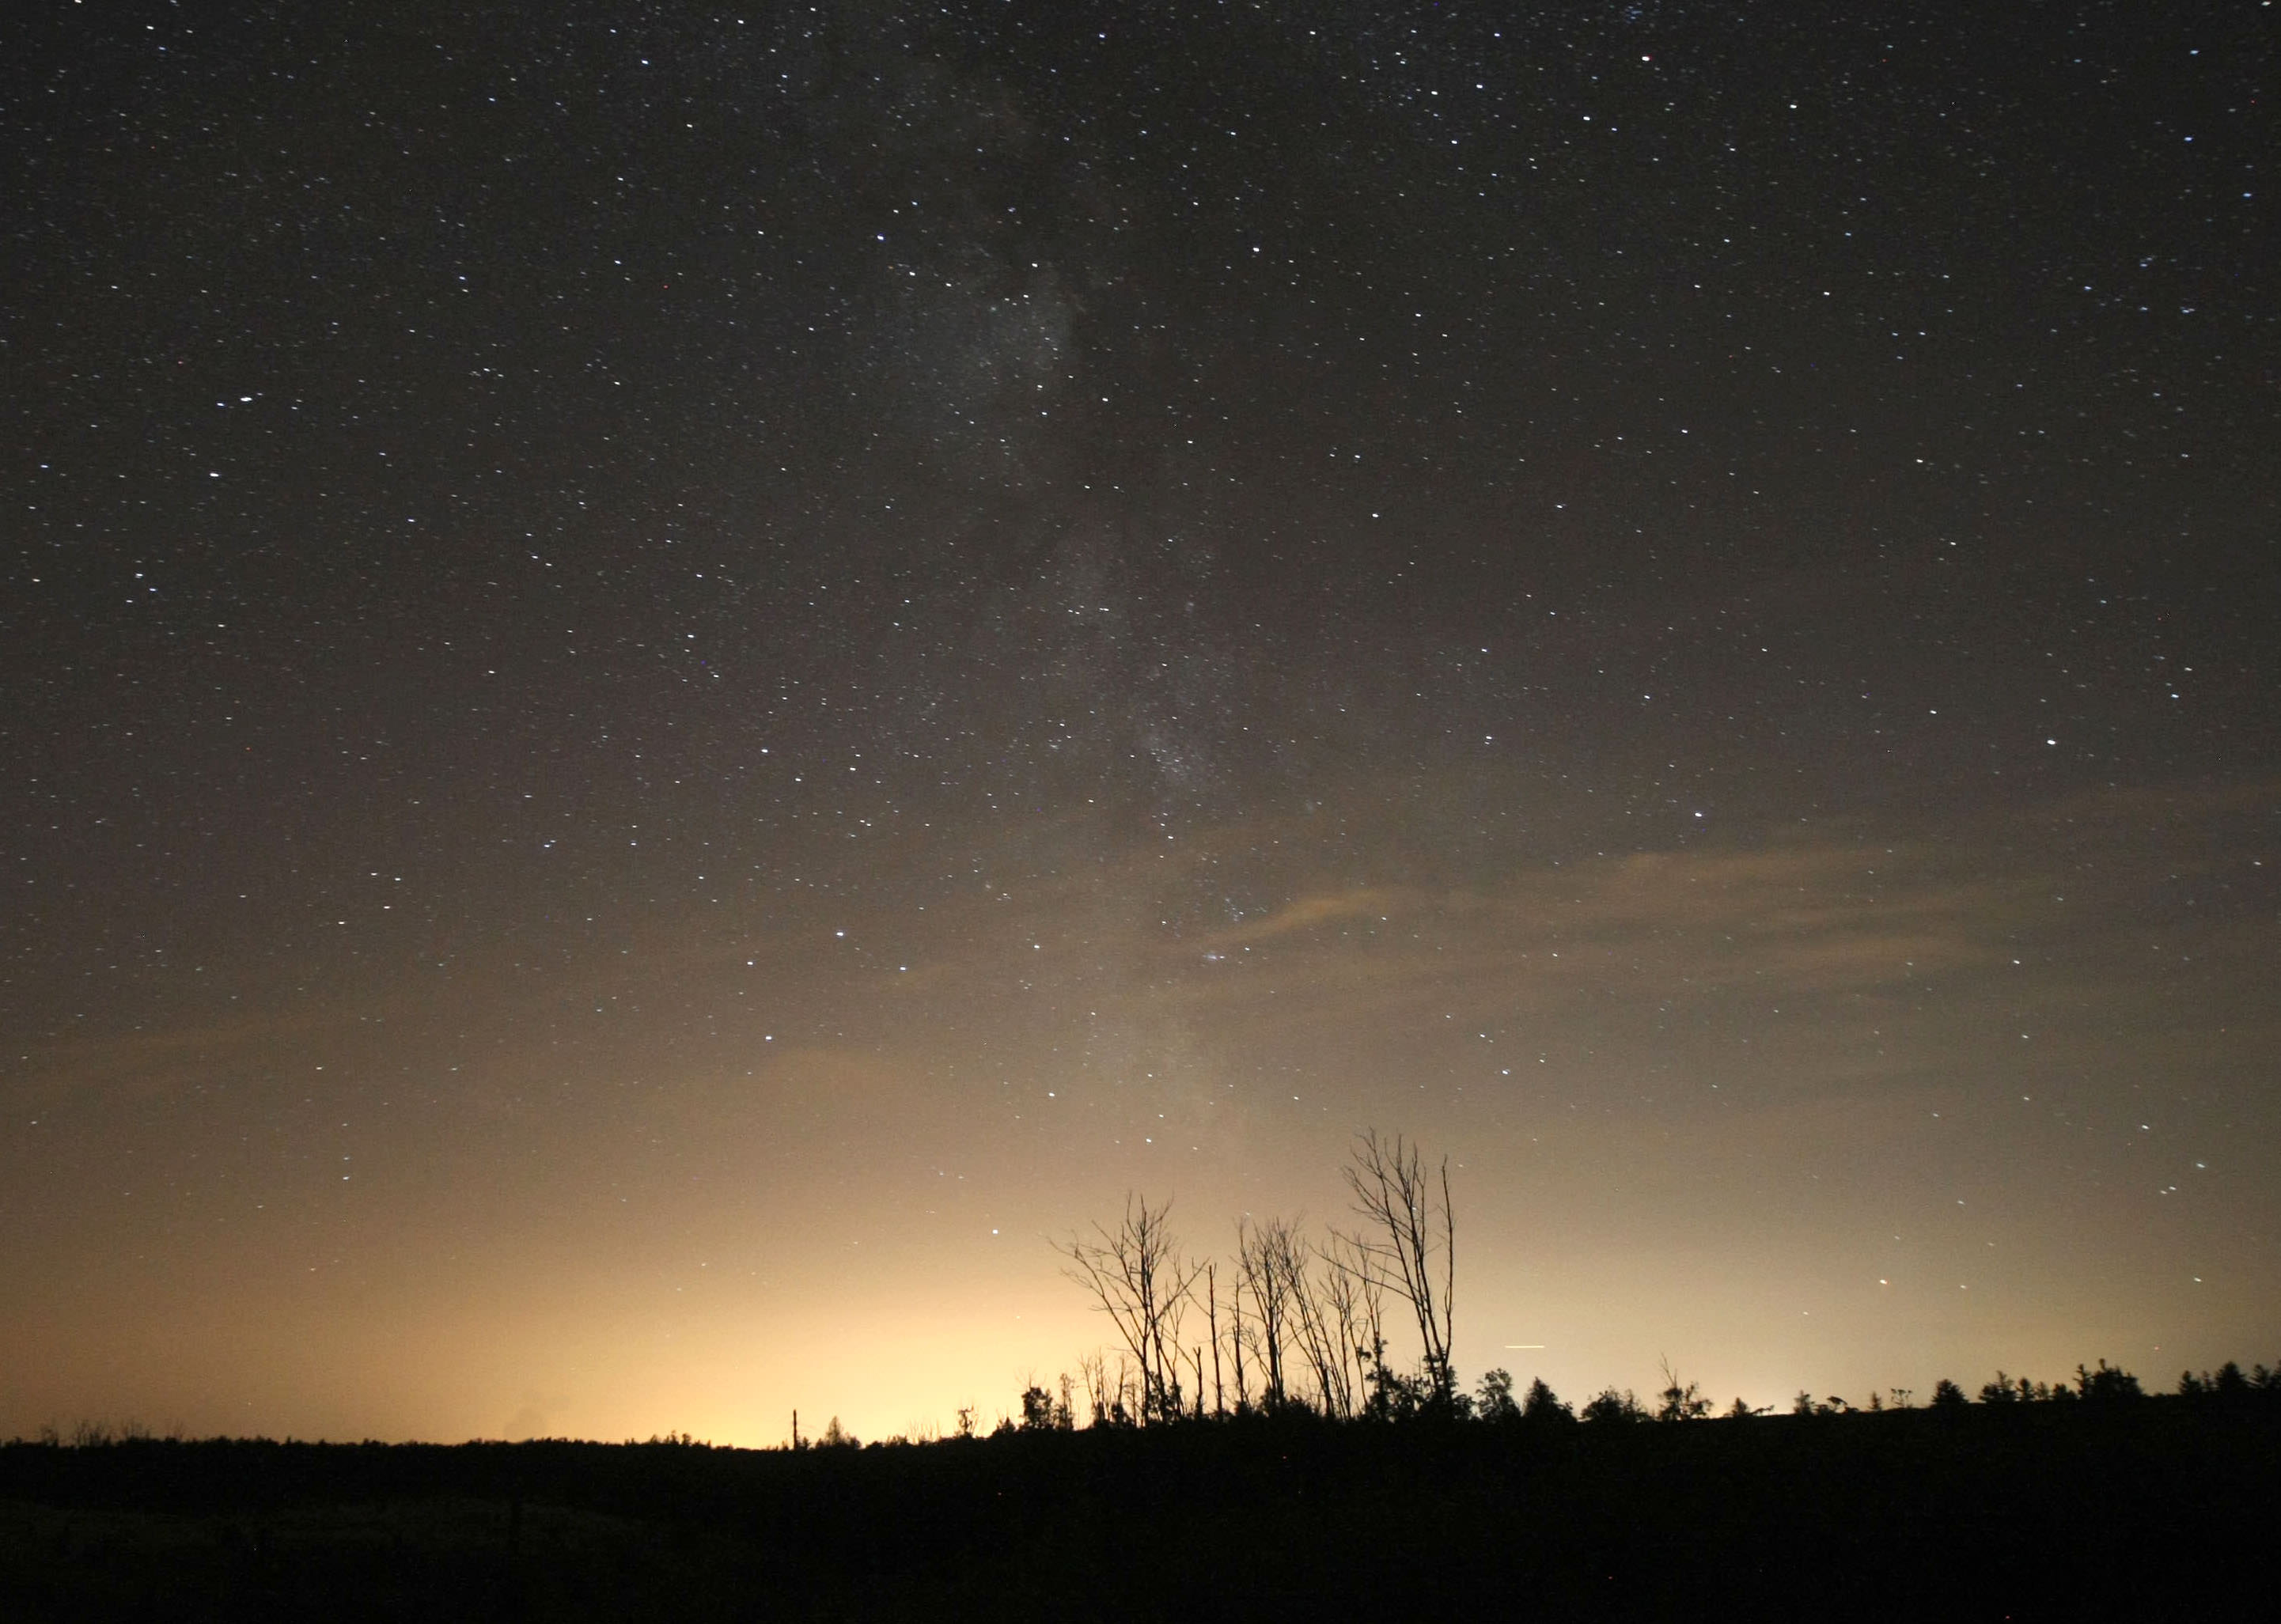 Urban sprawl and accompanying light pollution is an issue for both astronomers and fireflies. This view shows the light dome from the city of Duluth, Minn. 20 miles north of town. It erases the dark skies. Credit: Bob King